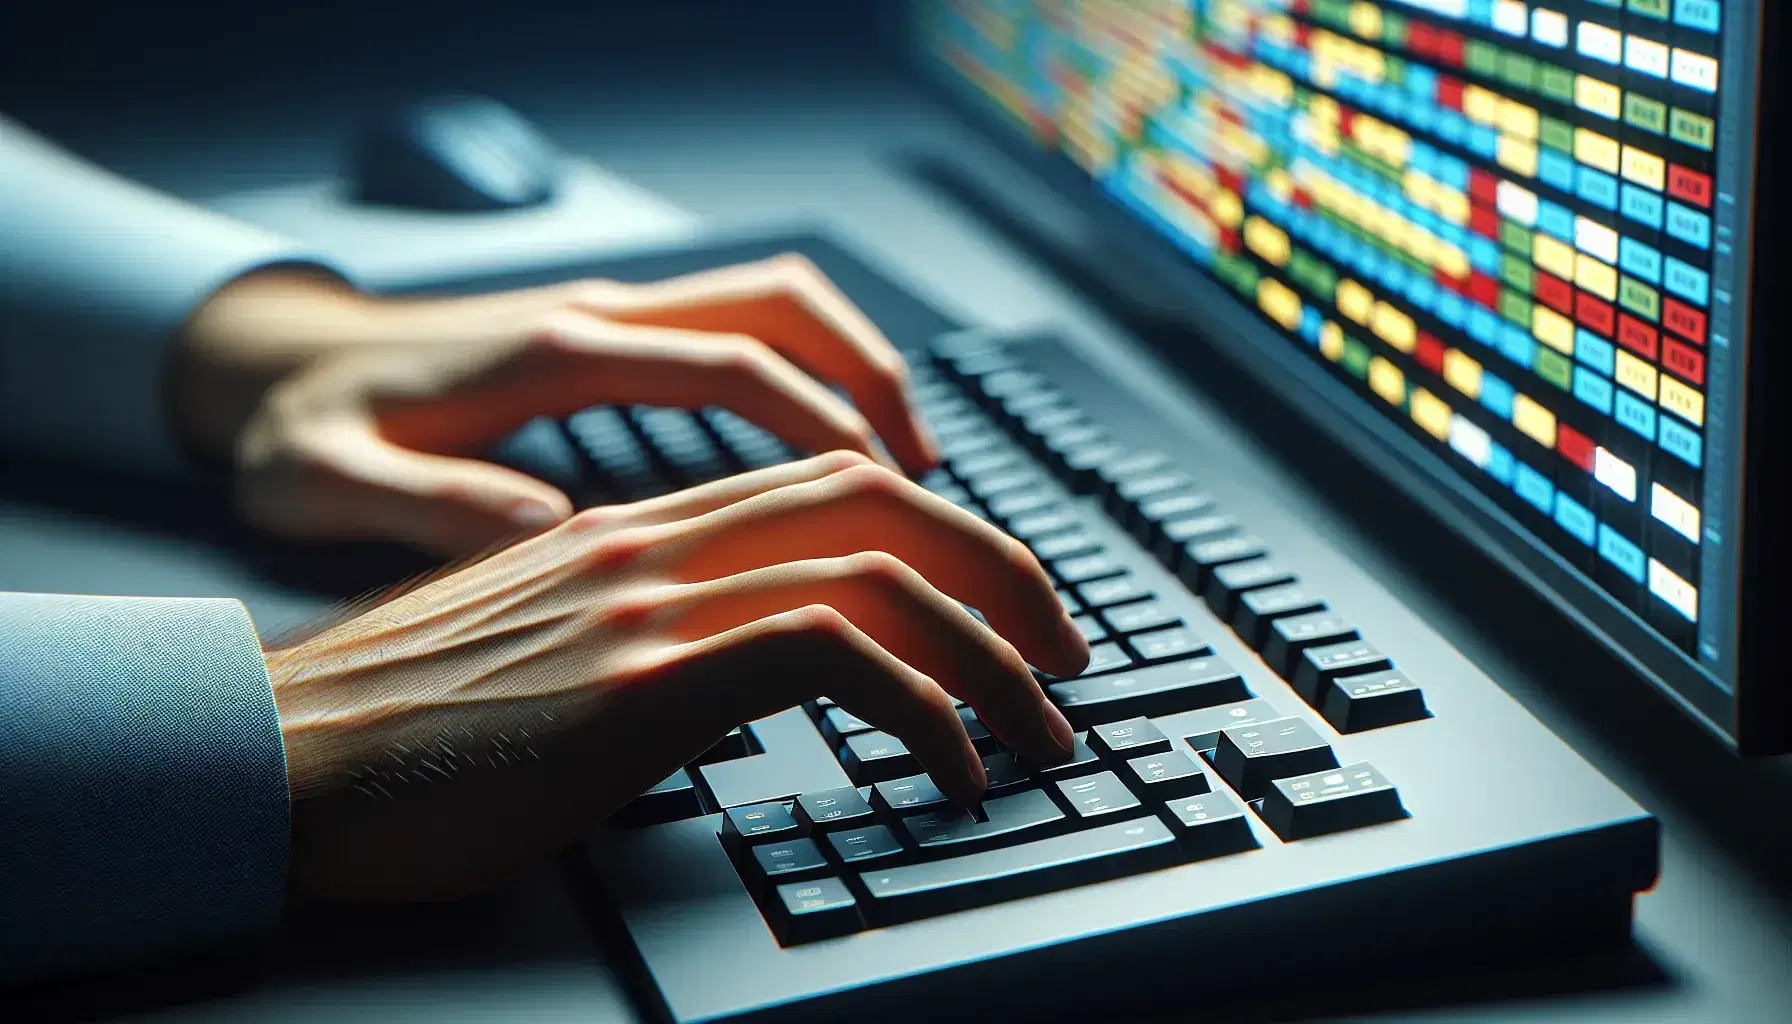 Hands resting on modern unmarked keyboard with monitor background showing abstract colorful grid, symbolizing data organization.